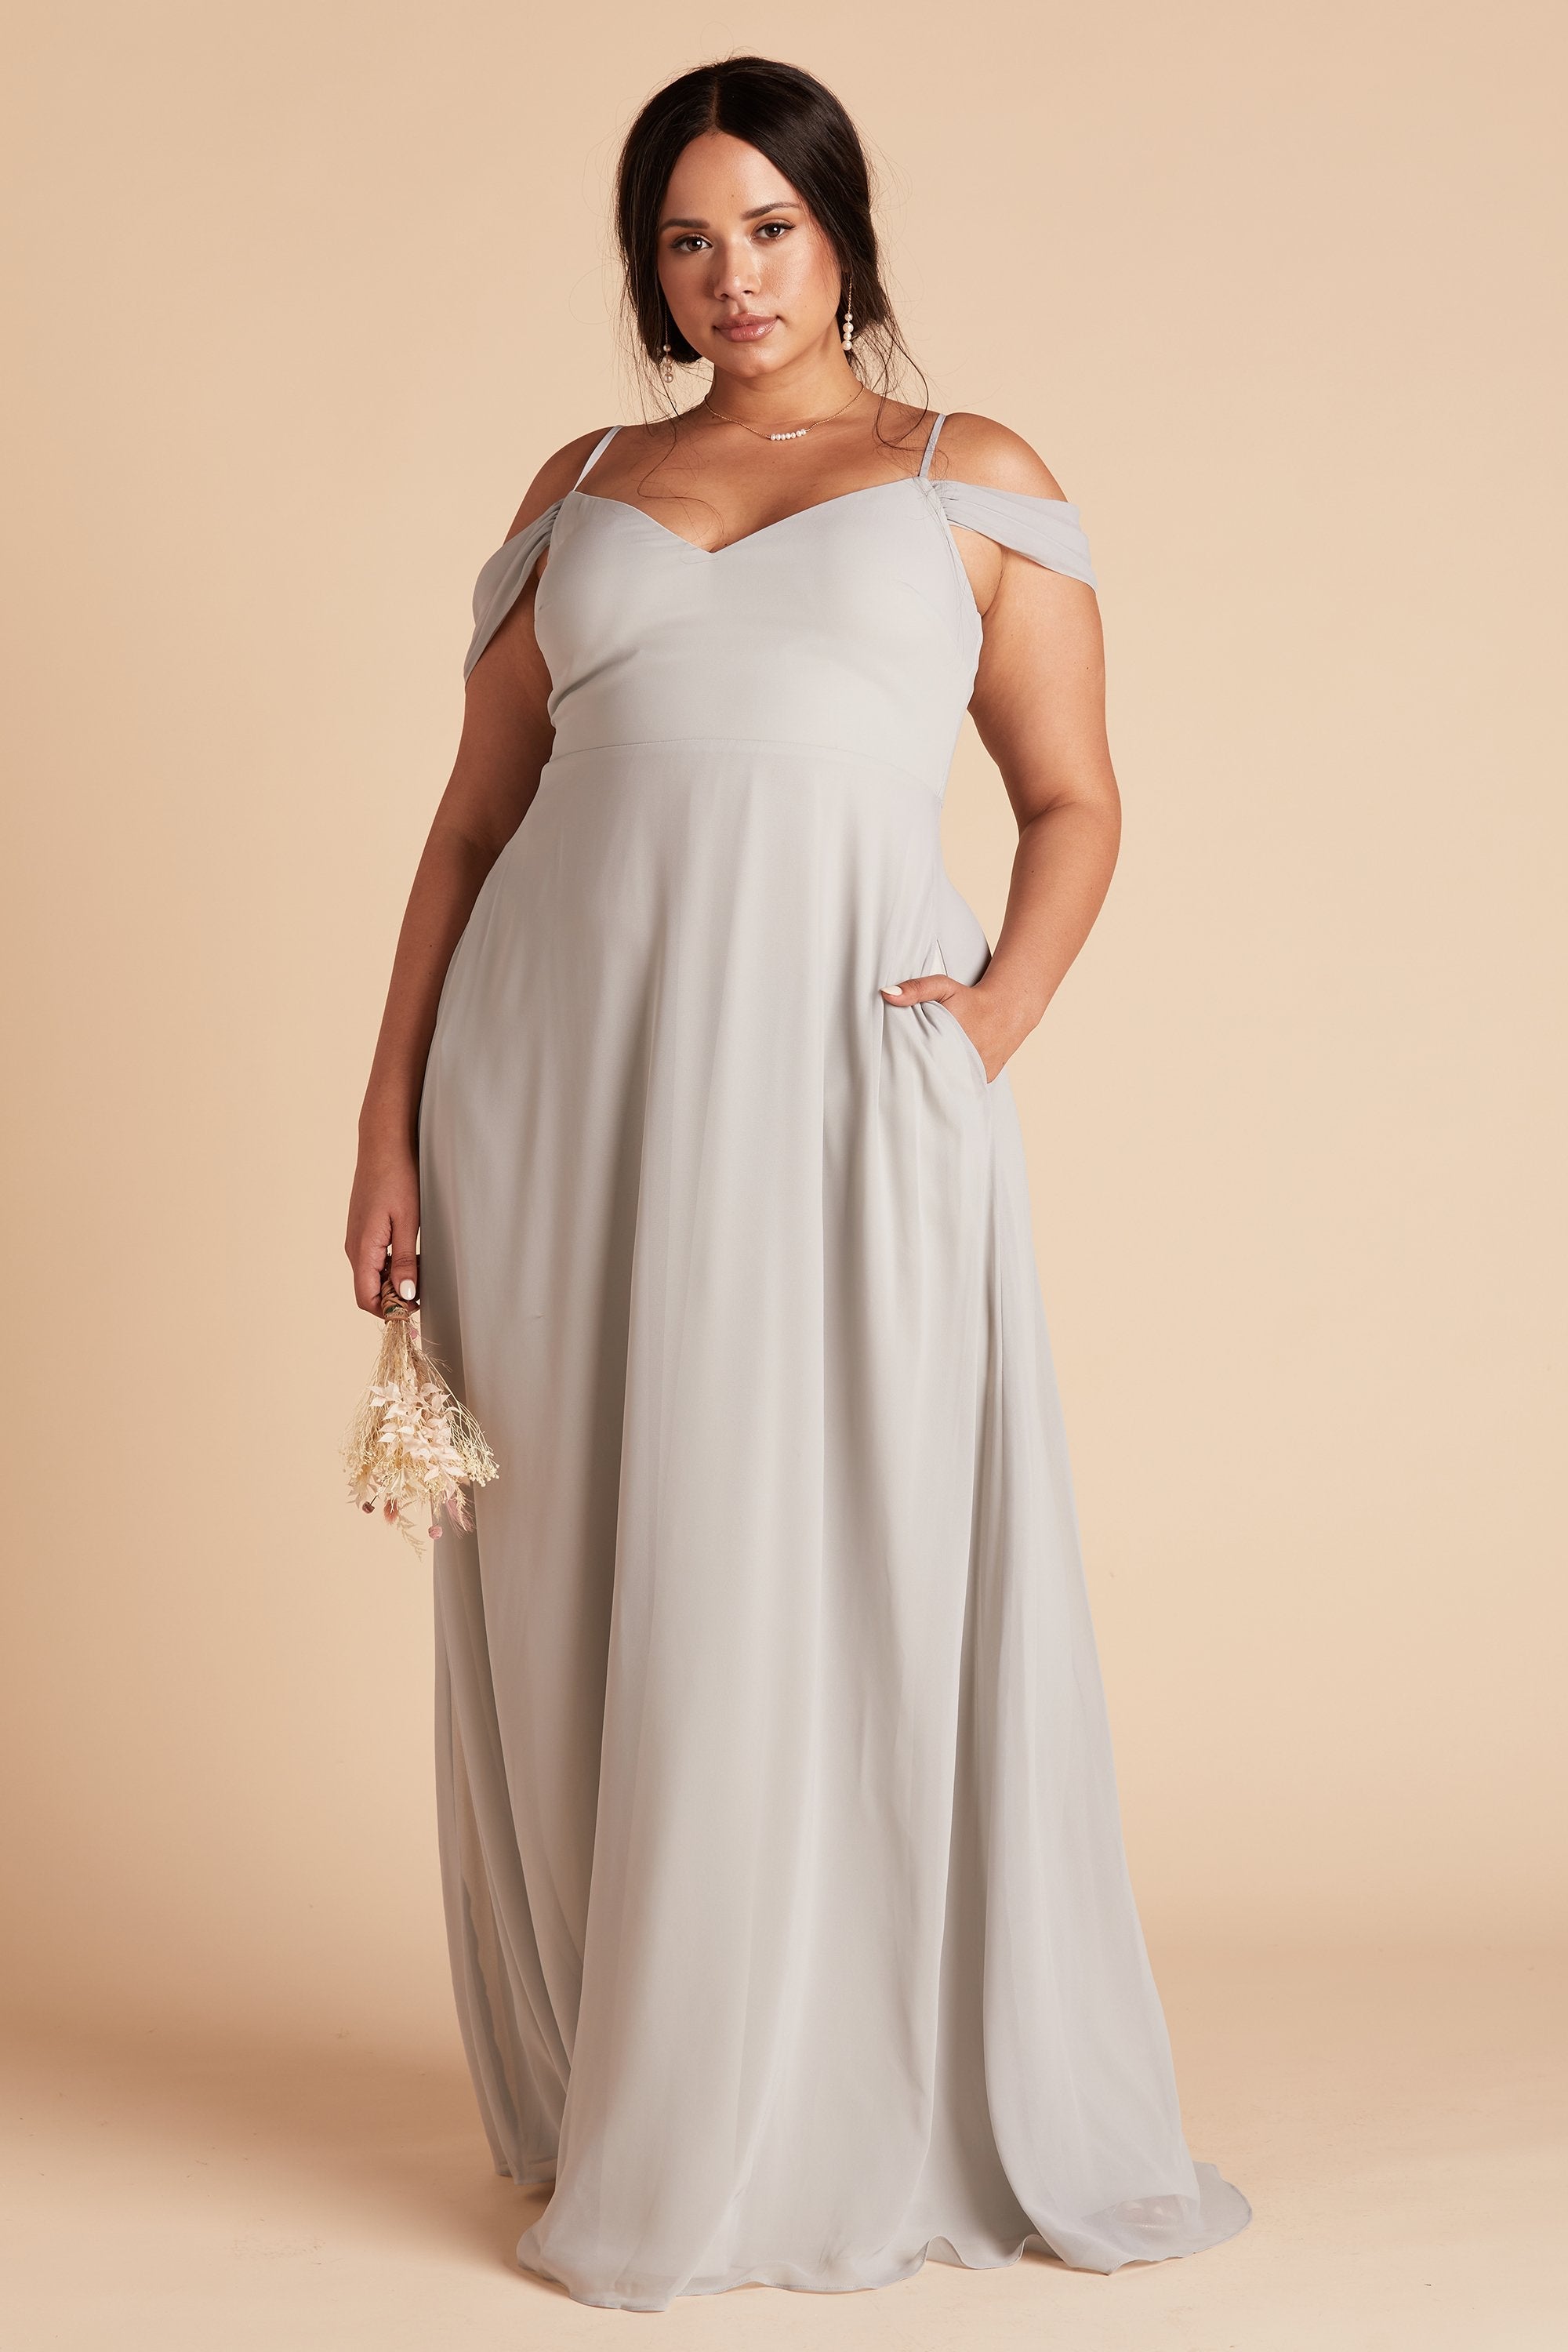 Devin convertible plus size bridesmaid dress in dove gray chiffon by Birdy Grey, front view with hand in pocket